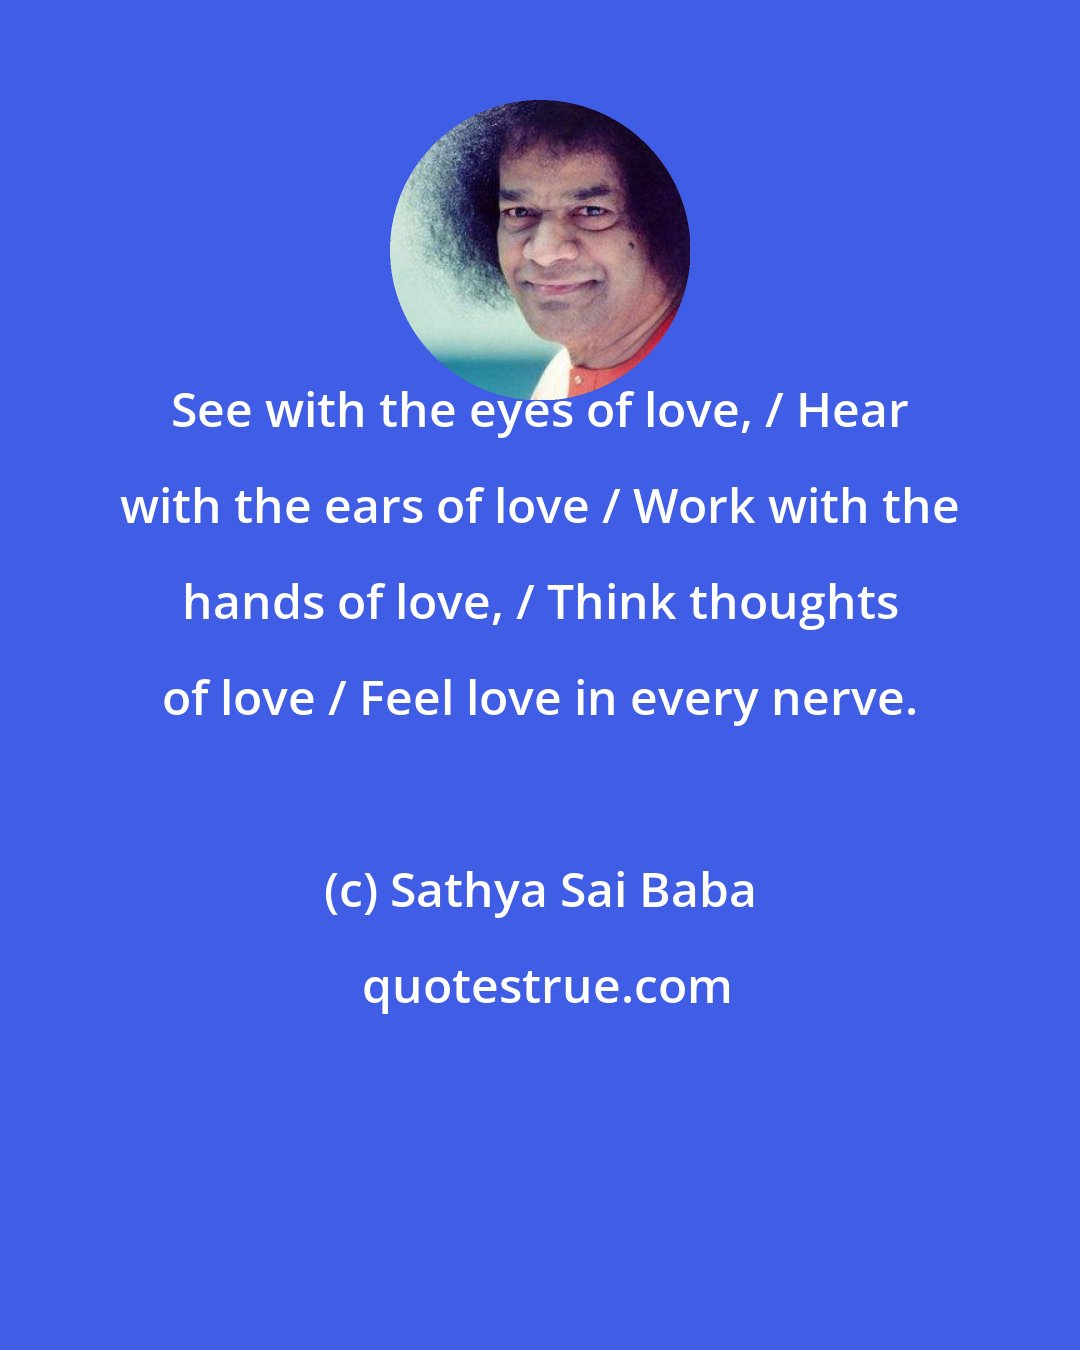 Sathya Sai Baba: See with the eyes of love, / Hear with the ears of love / Work with the hands of love, / Think thoughts of love / Feel love in every nerve.